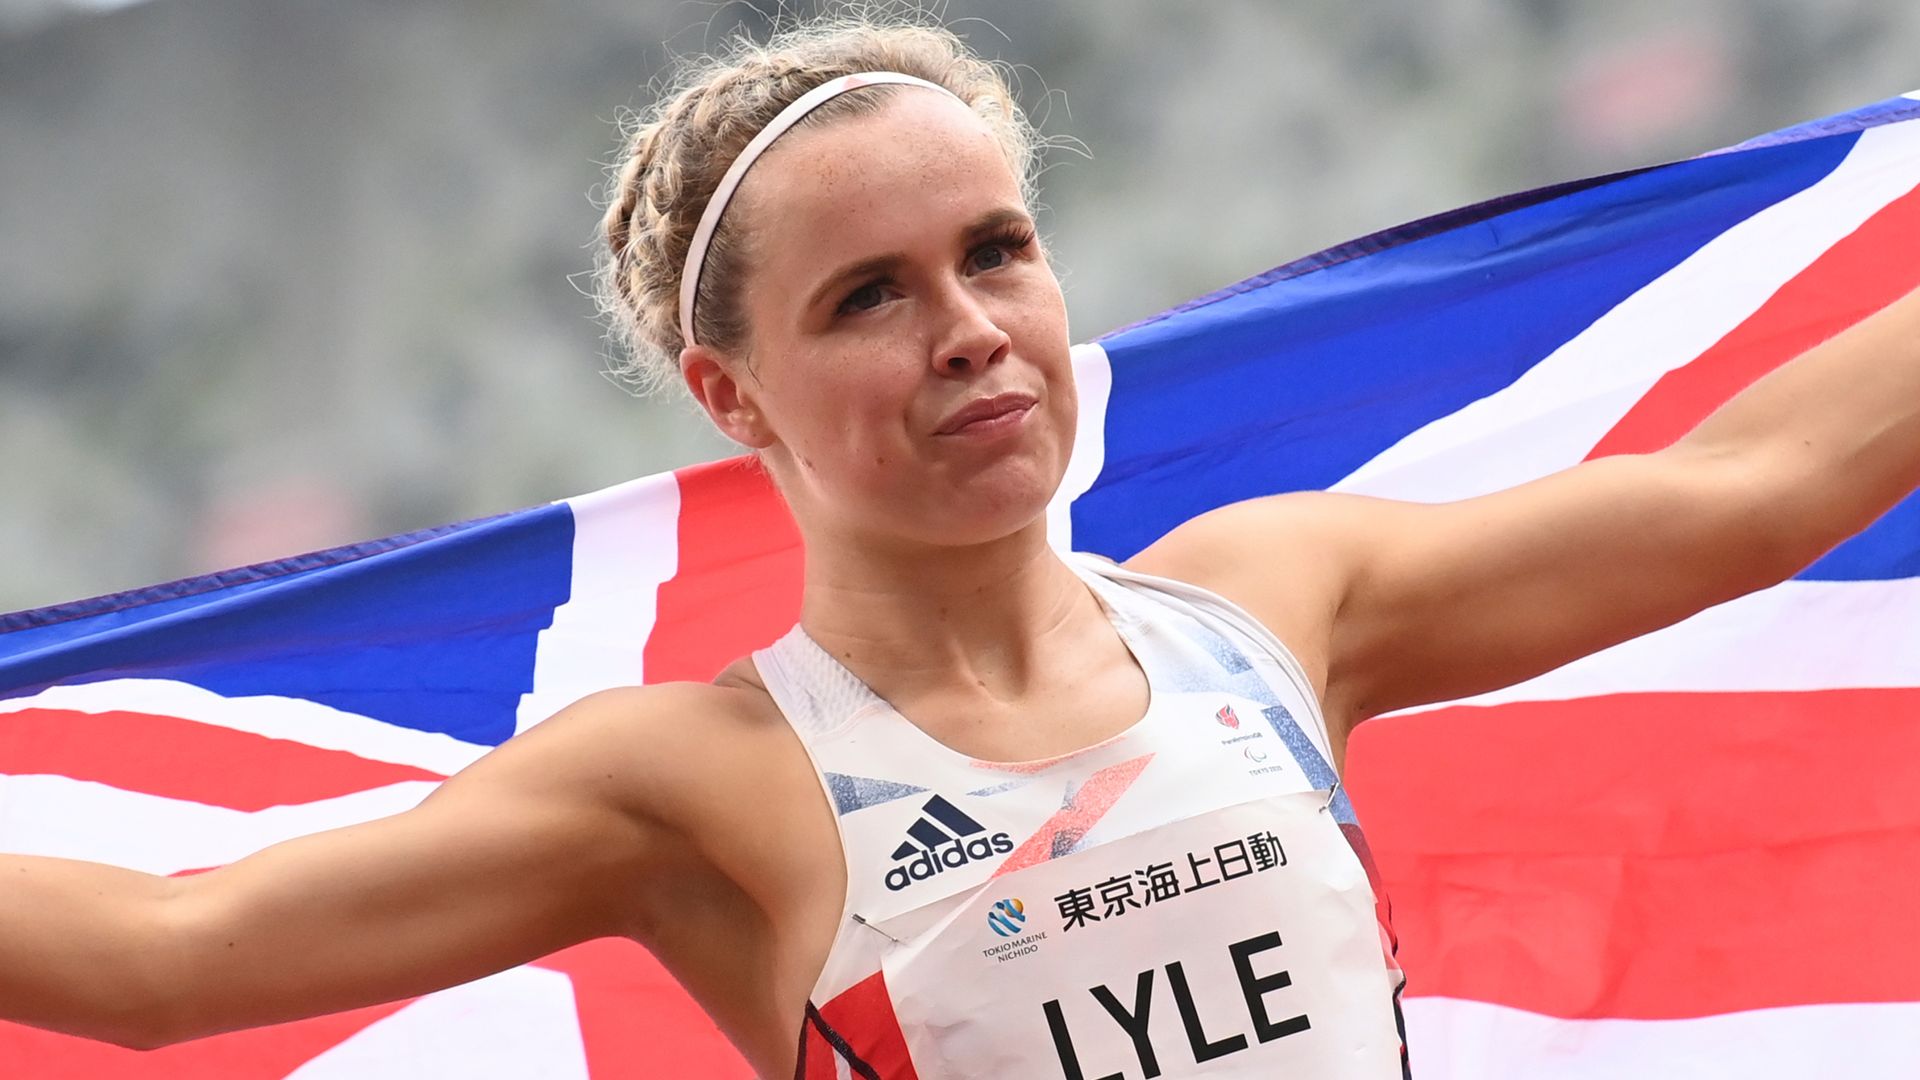 Lyle wins ParalympicsGB's first athletics medal in Tokyo